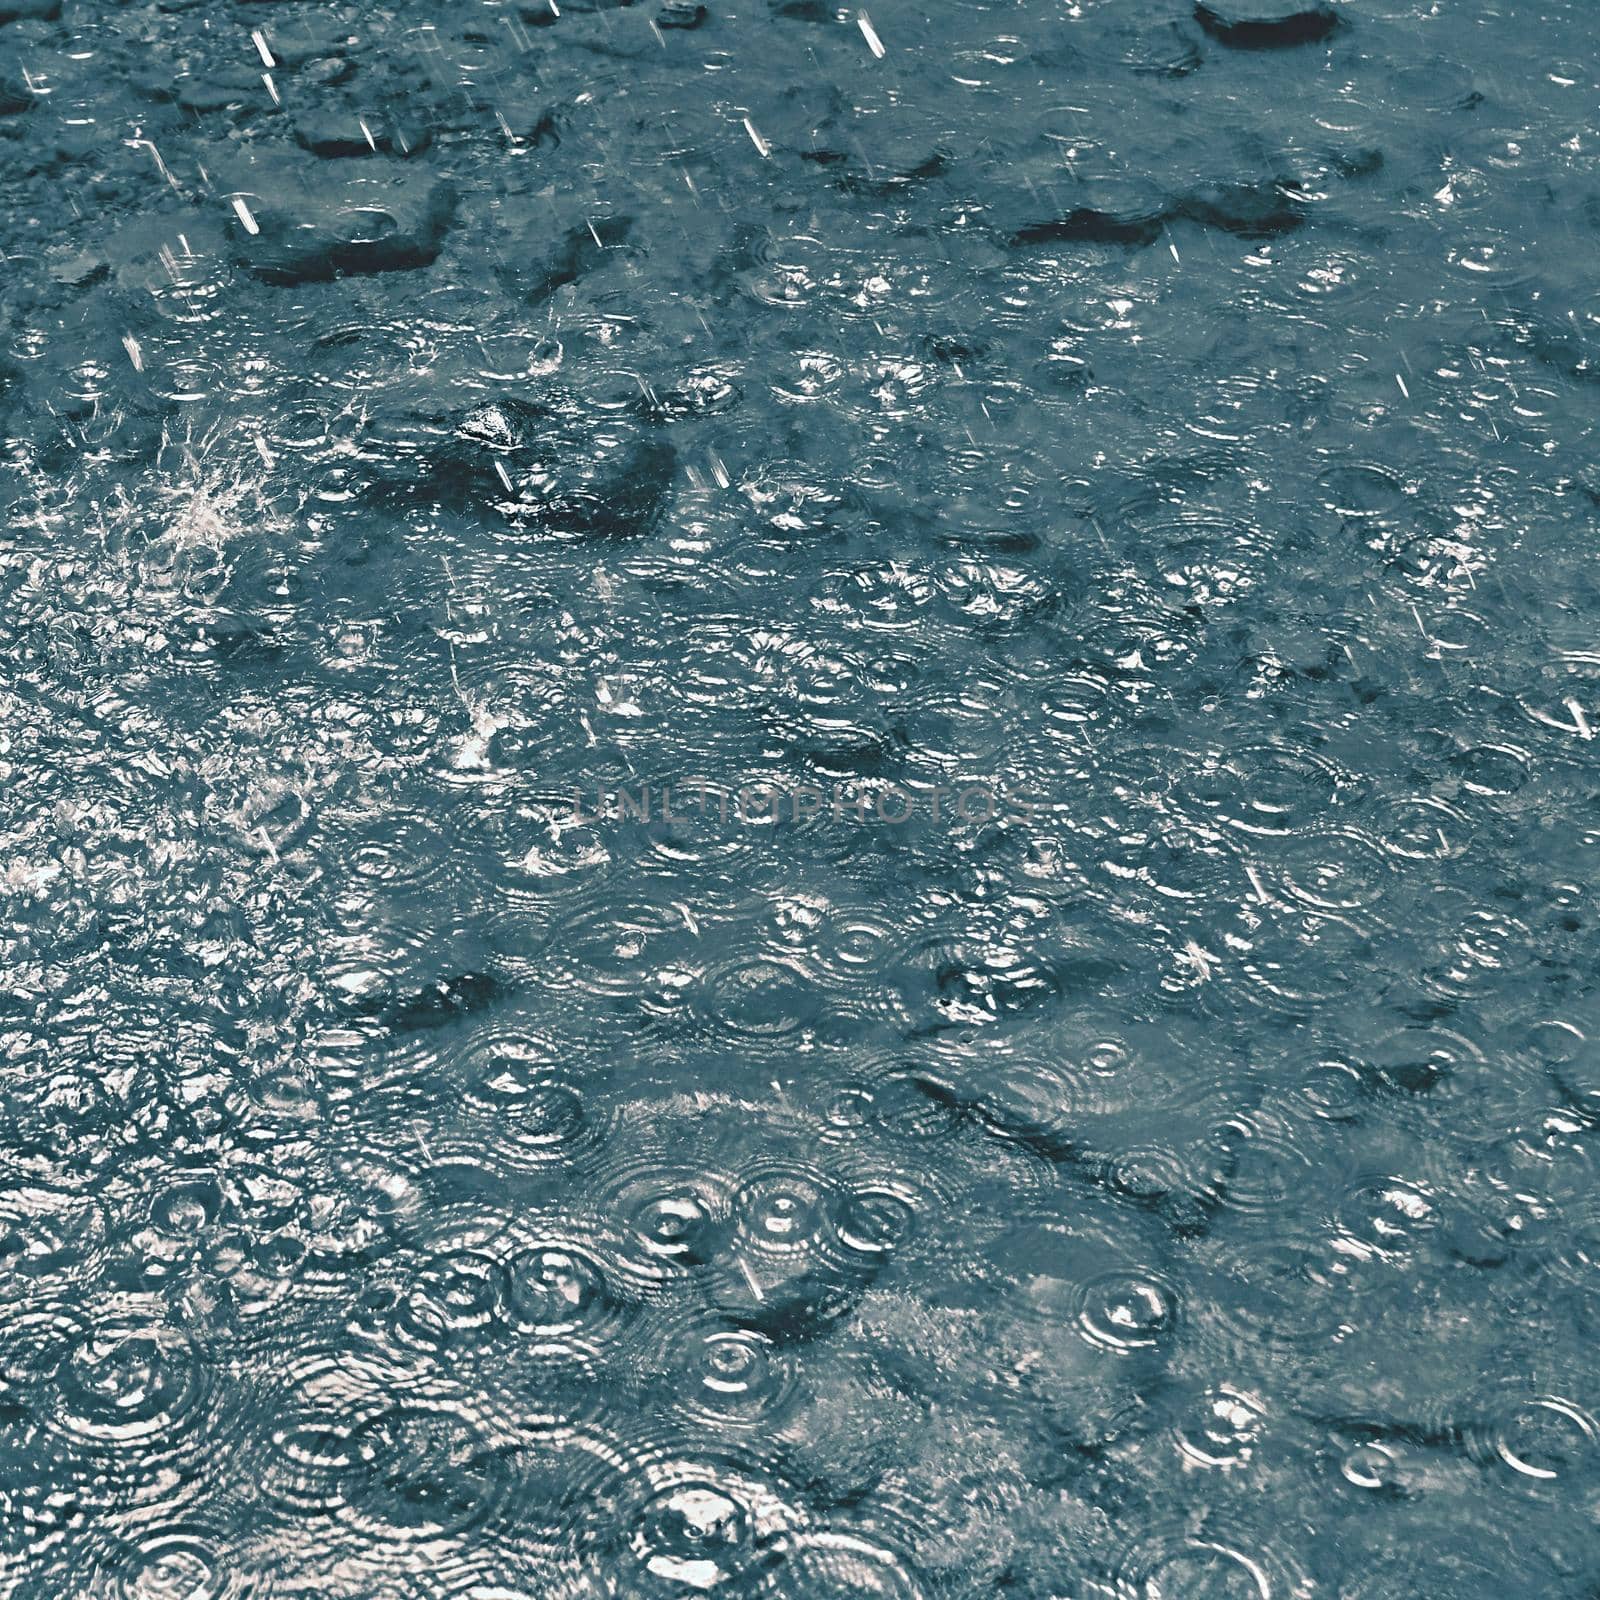 Rain. Beautiful abstract background with bad weather. Rain drops falling into the water.